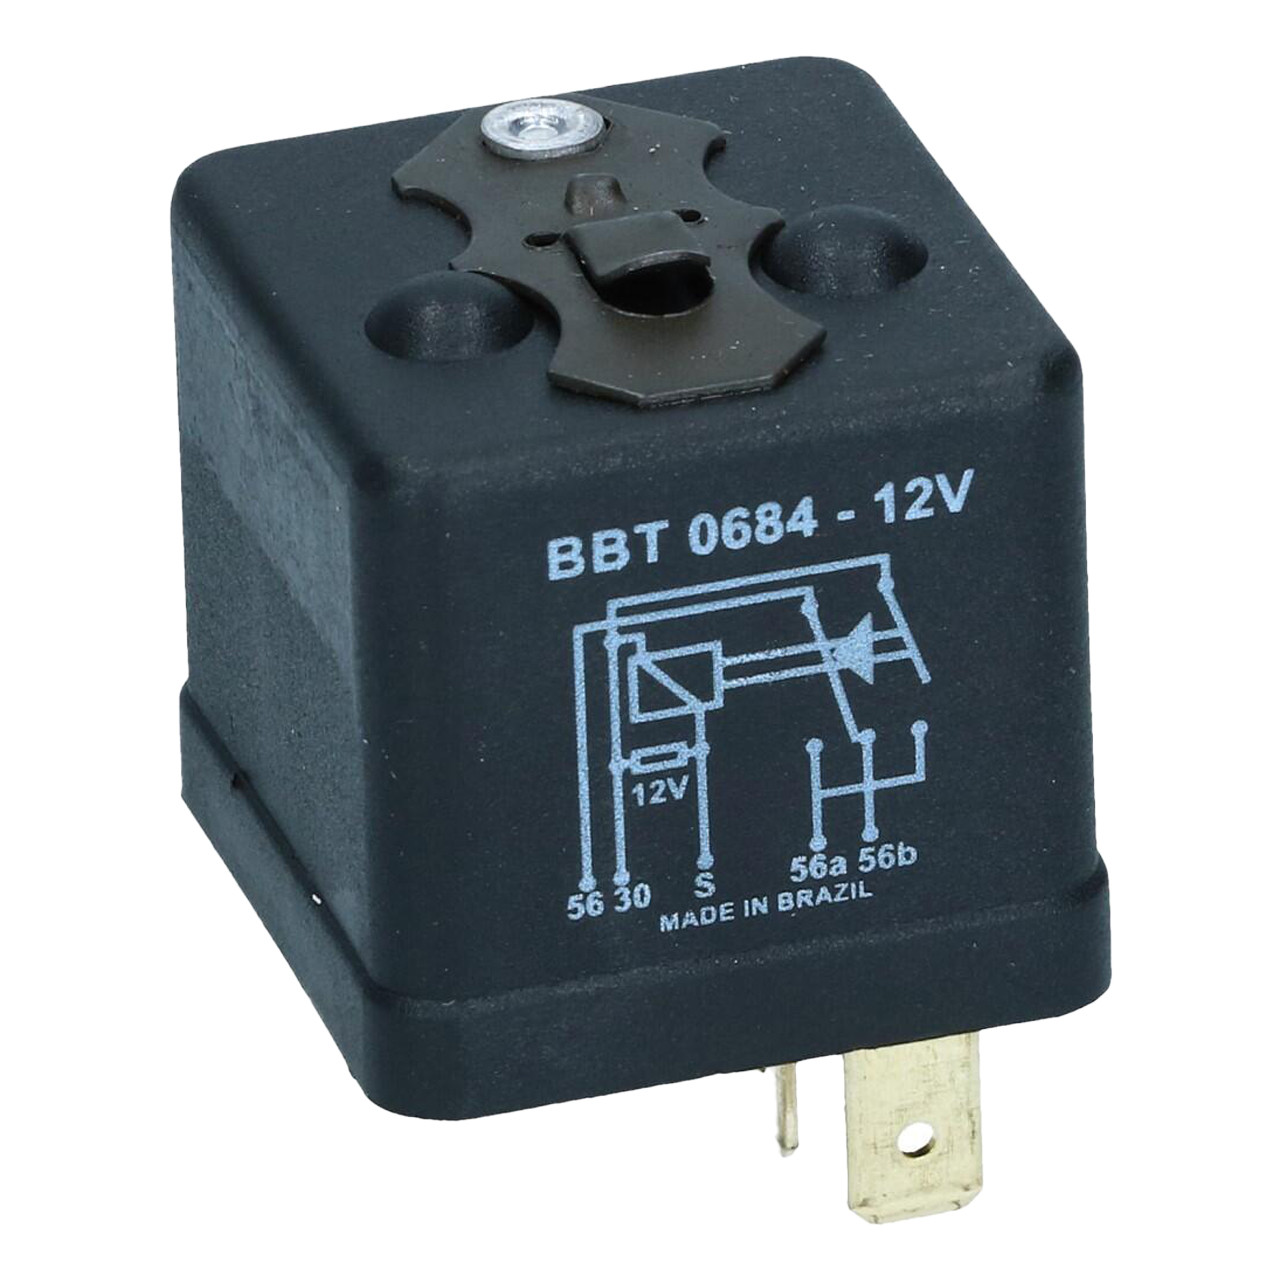 Image of C24-111-941-583 - 111941583 - TOP QUALITY - BRAND MAY VARY - HEADLIGHT DIMMER RELAY 12 VOLT 5 PRONG - BEETLE 67-79 - GHIA 67-74 - BUS 68-79 - SOLD EACH